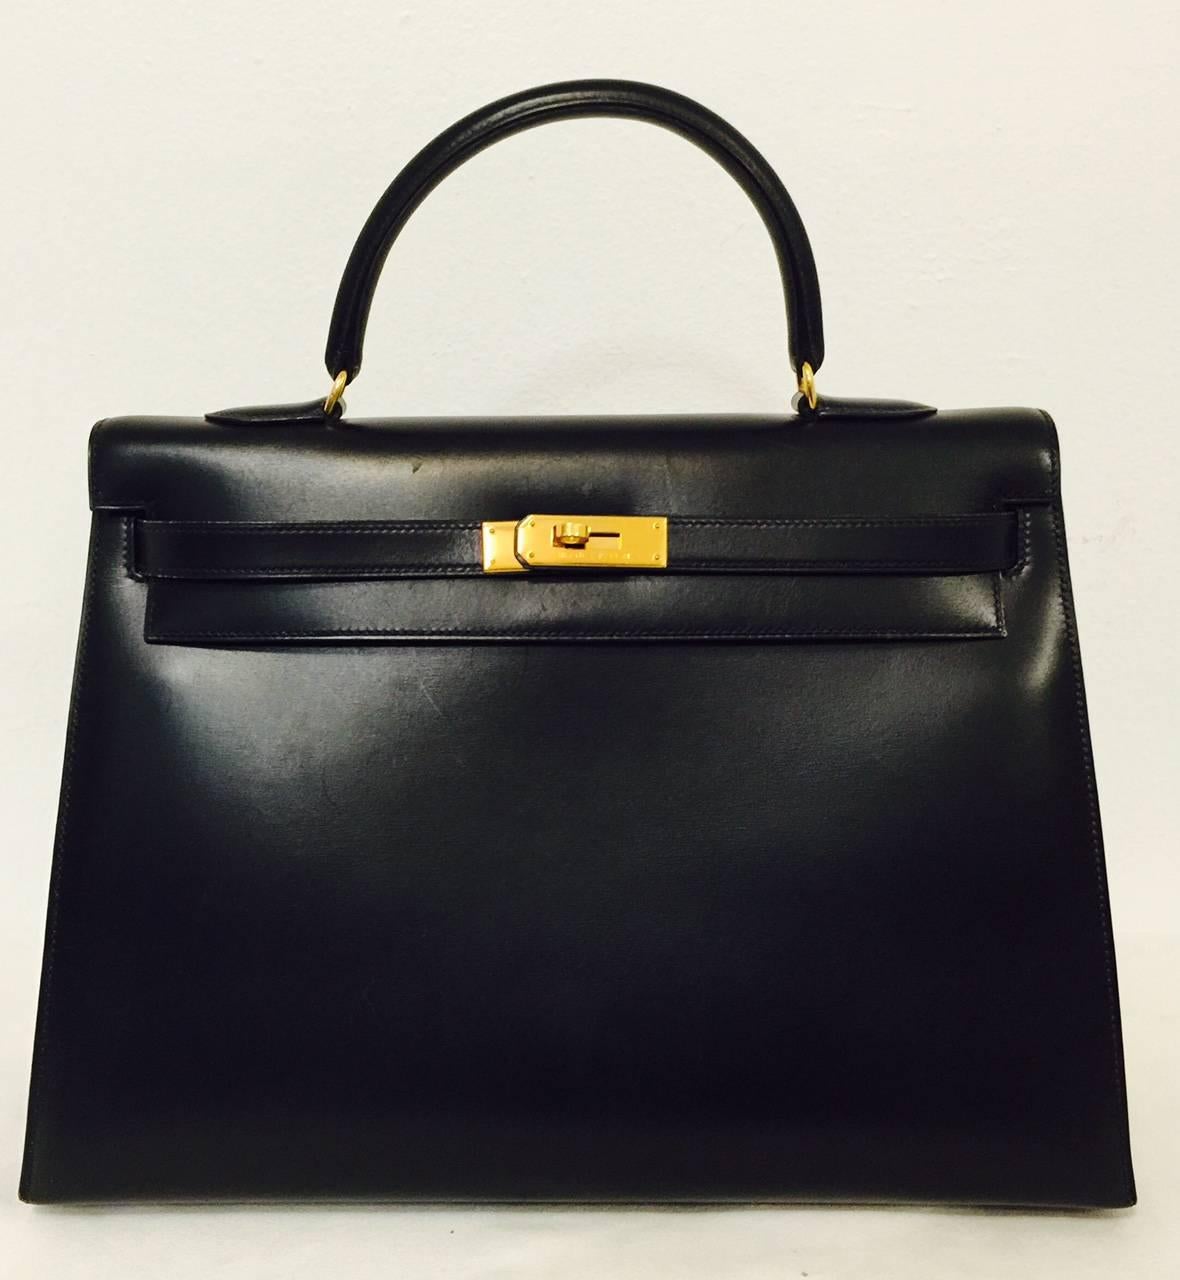 This 1993 Hermes Black Box Calf Kelly 35 with gold hardware is the ultimate symbol of status and luxury originally crafted for Princess Grace Kelly of Monaco herself! A classic staple every fashion forward woman's wardrobe should feature. Each Kelly